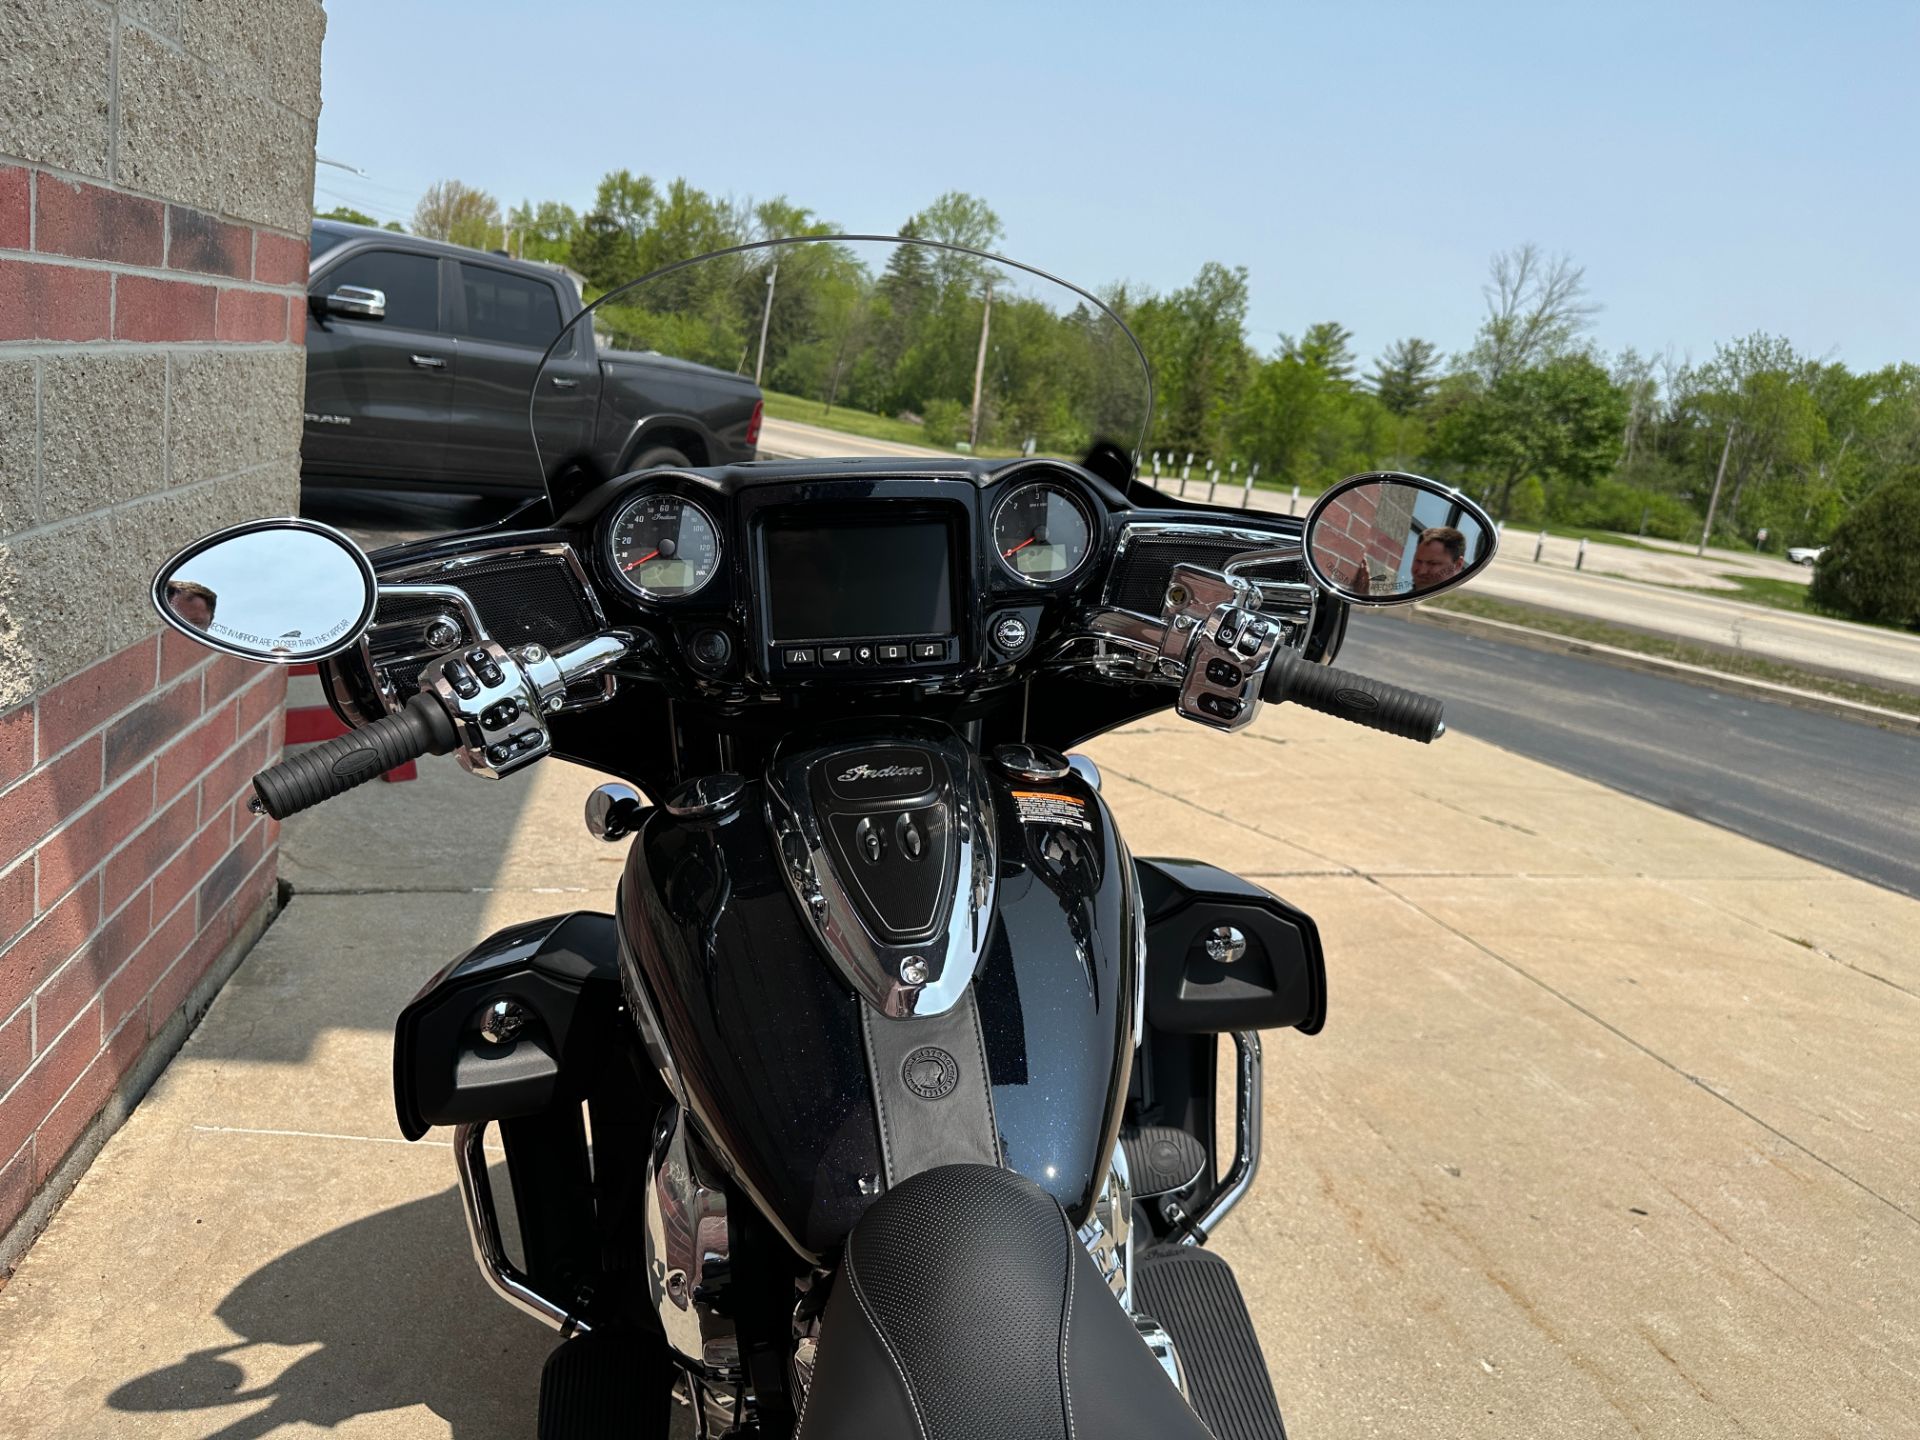 2023 Indian Motorcycle Roadmaster® Limited in Muskego, Wisconsin - Photo 15